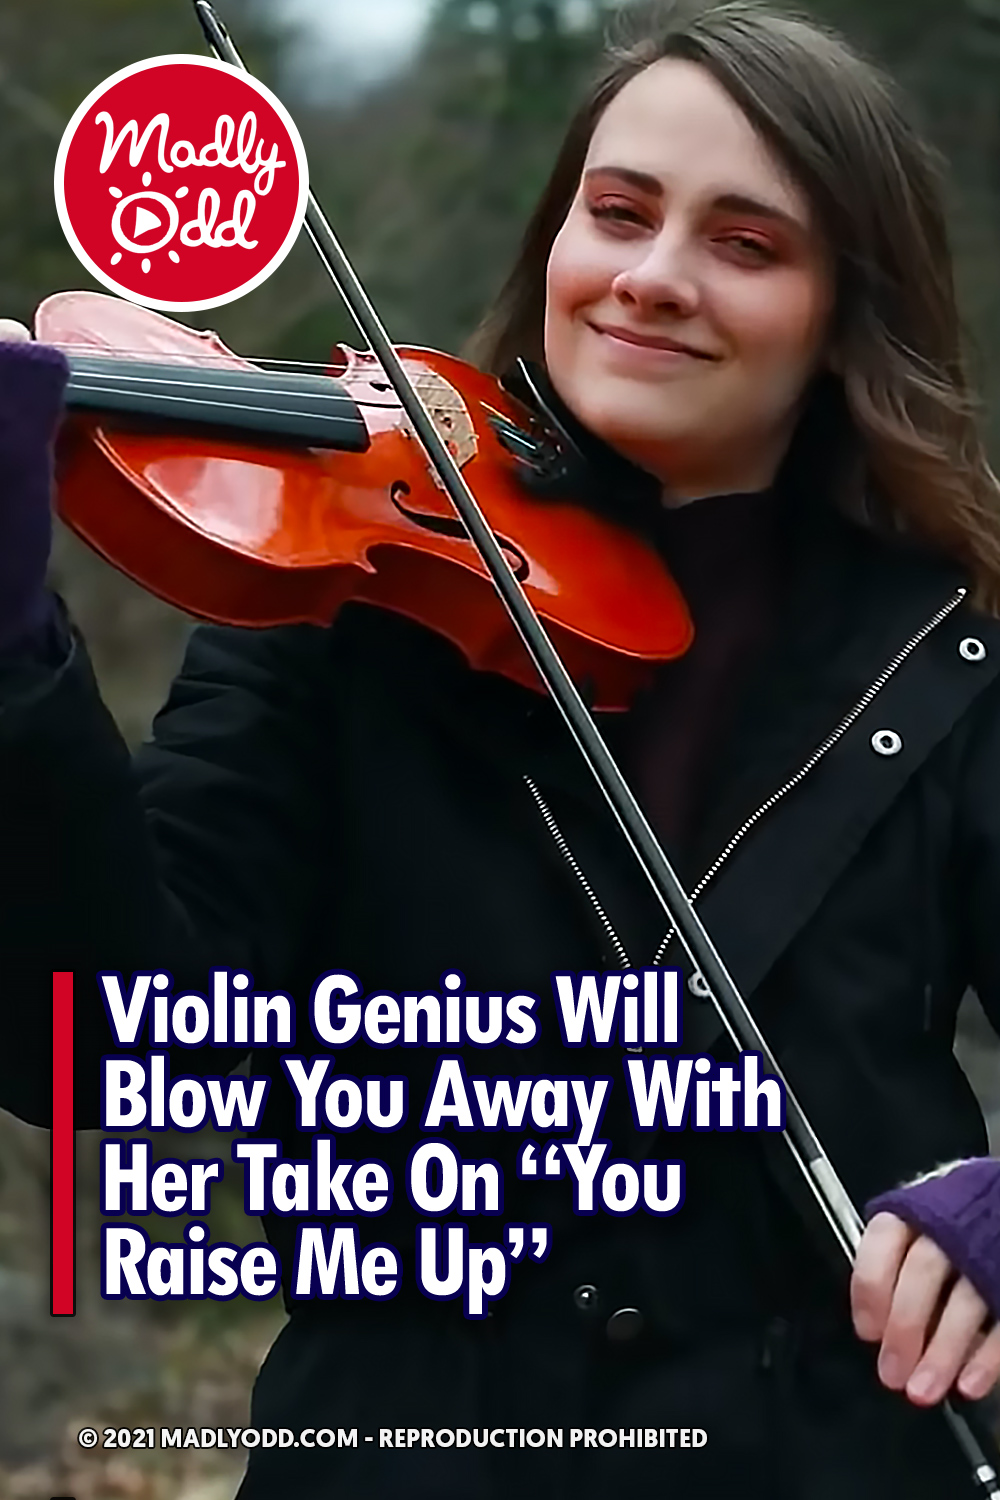 Violin Genius Will Blow You Away With Her Take On “You Raise Me Up”